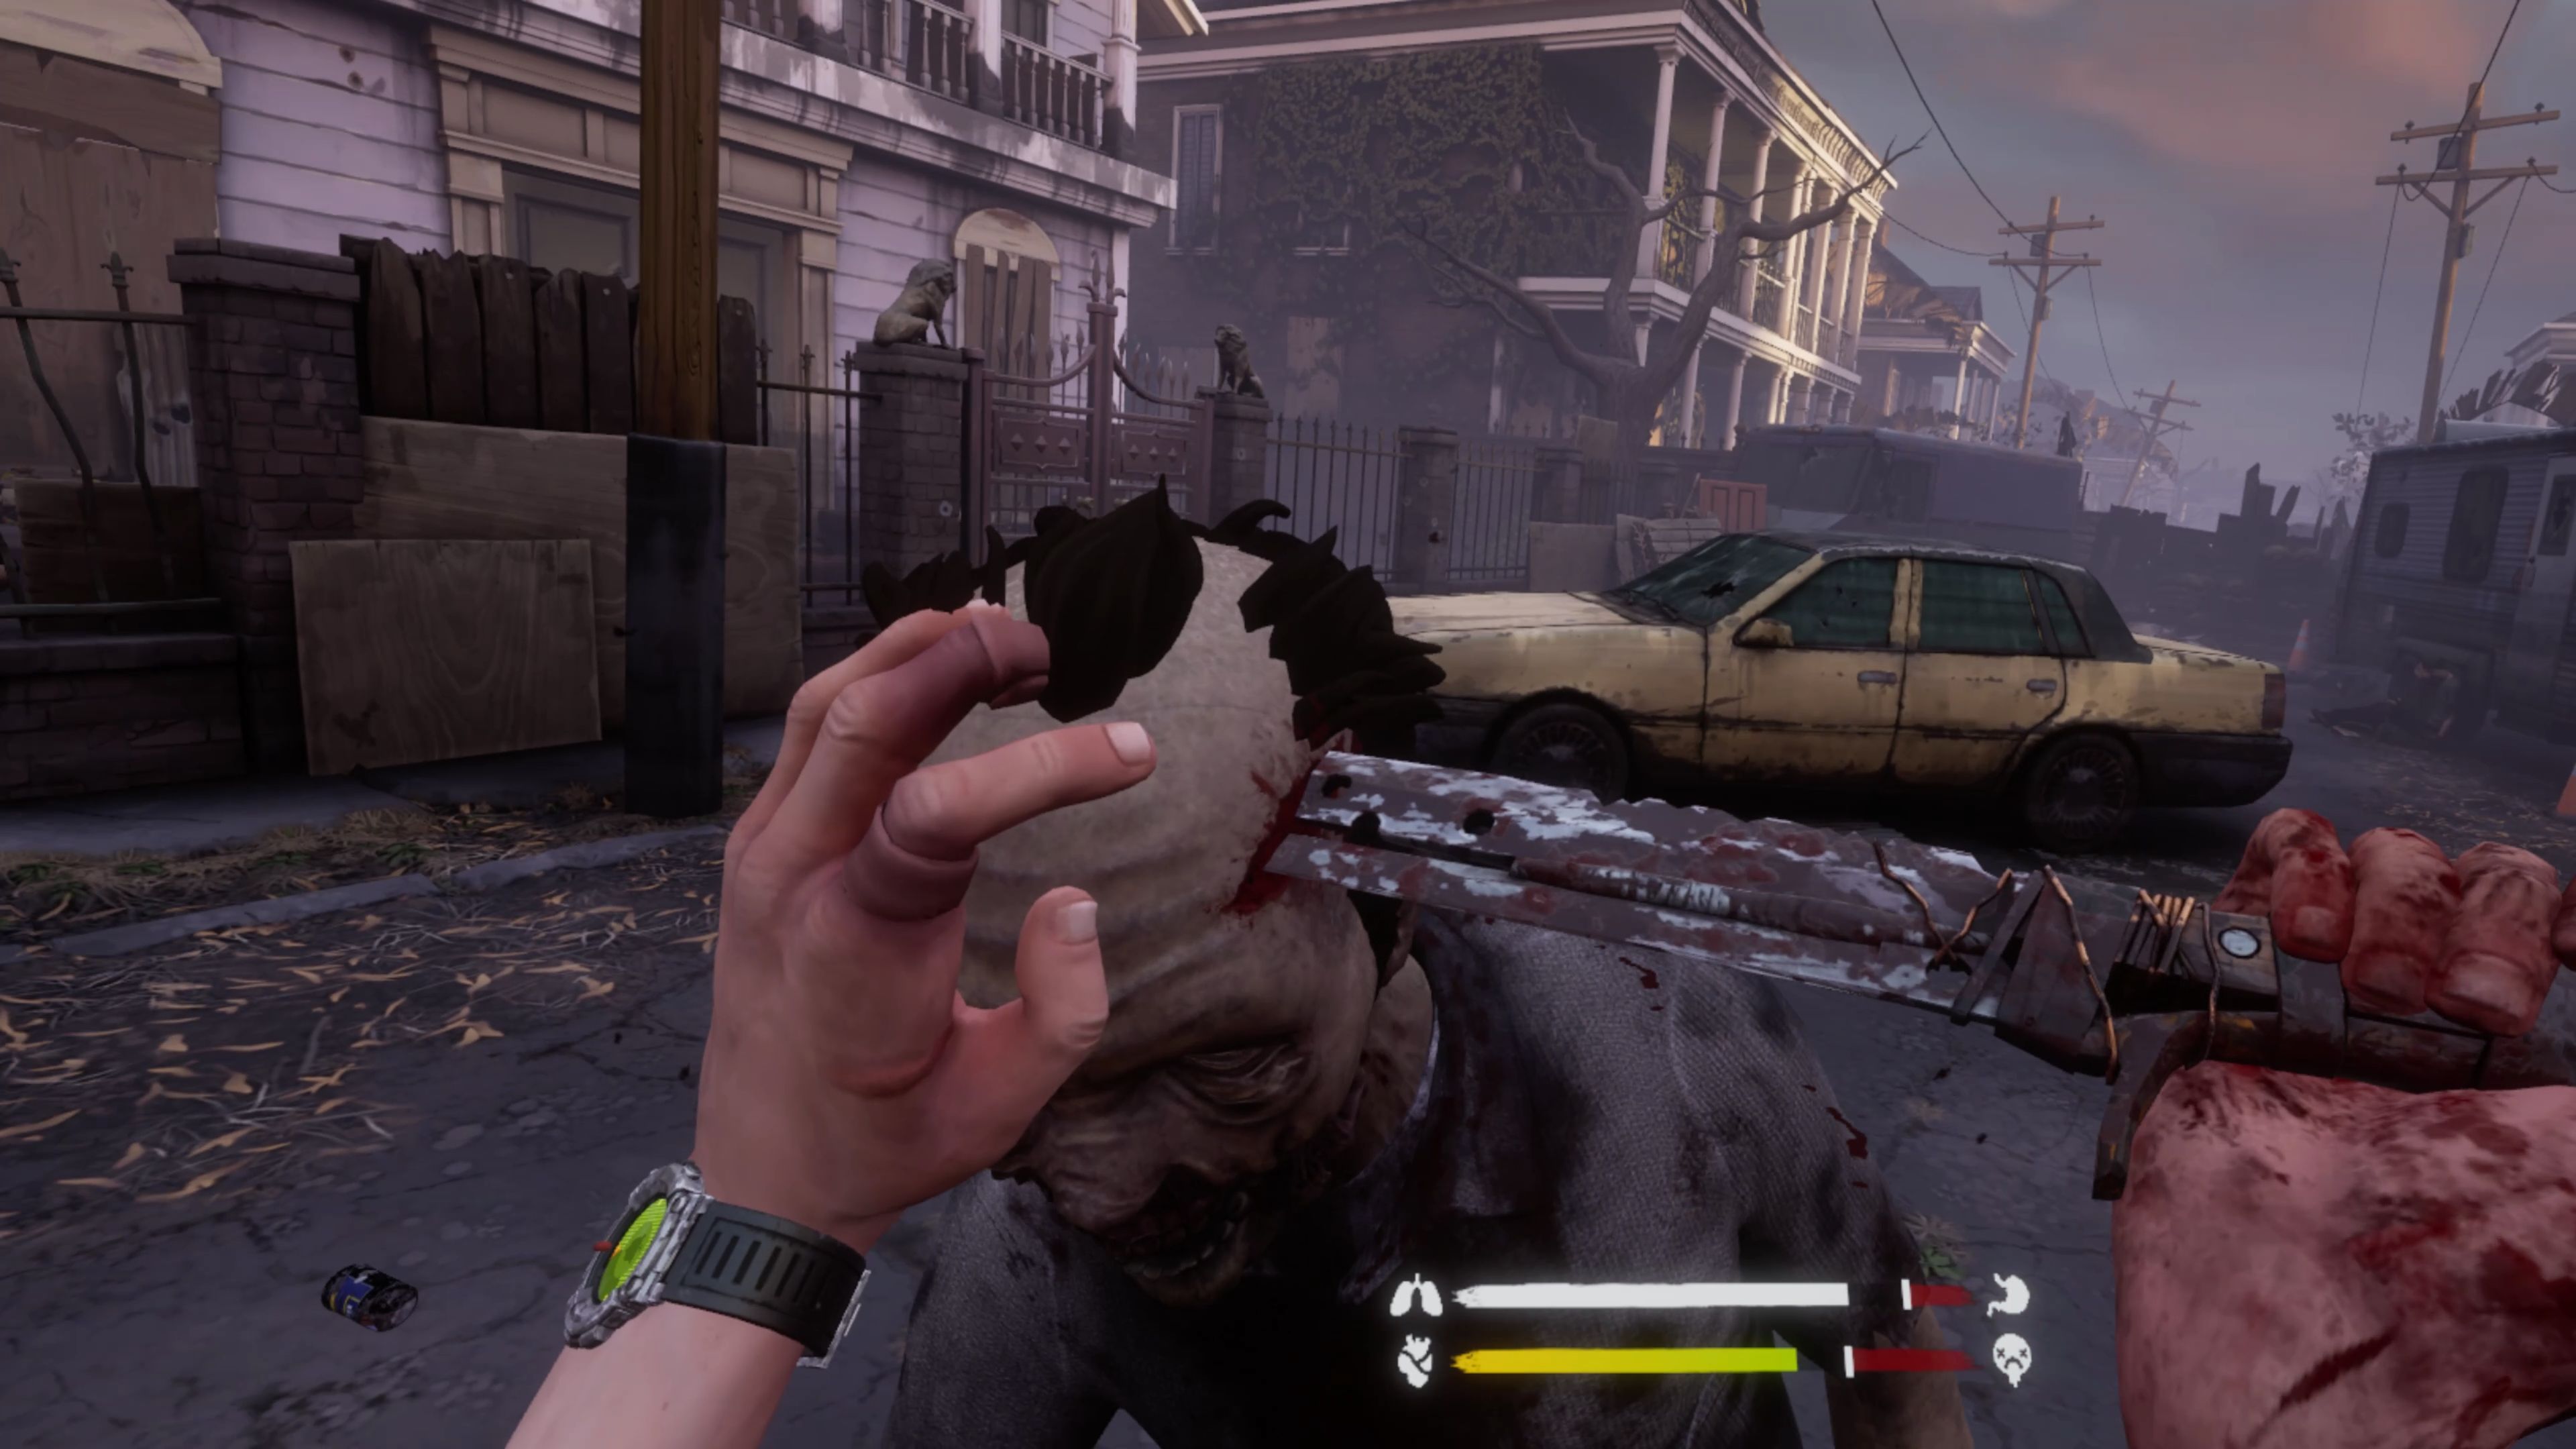 Jamming a survival knife through a zombie's skull